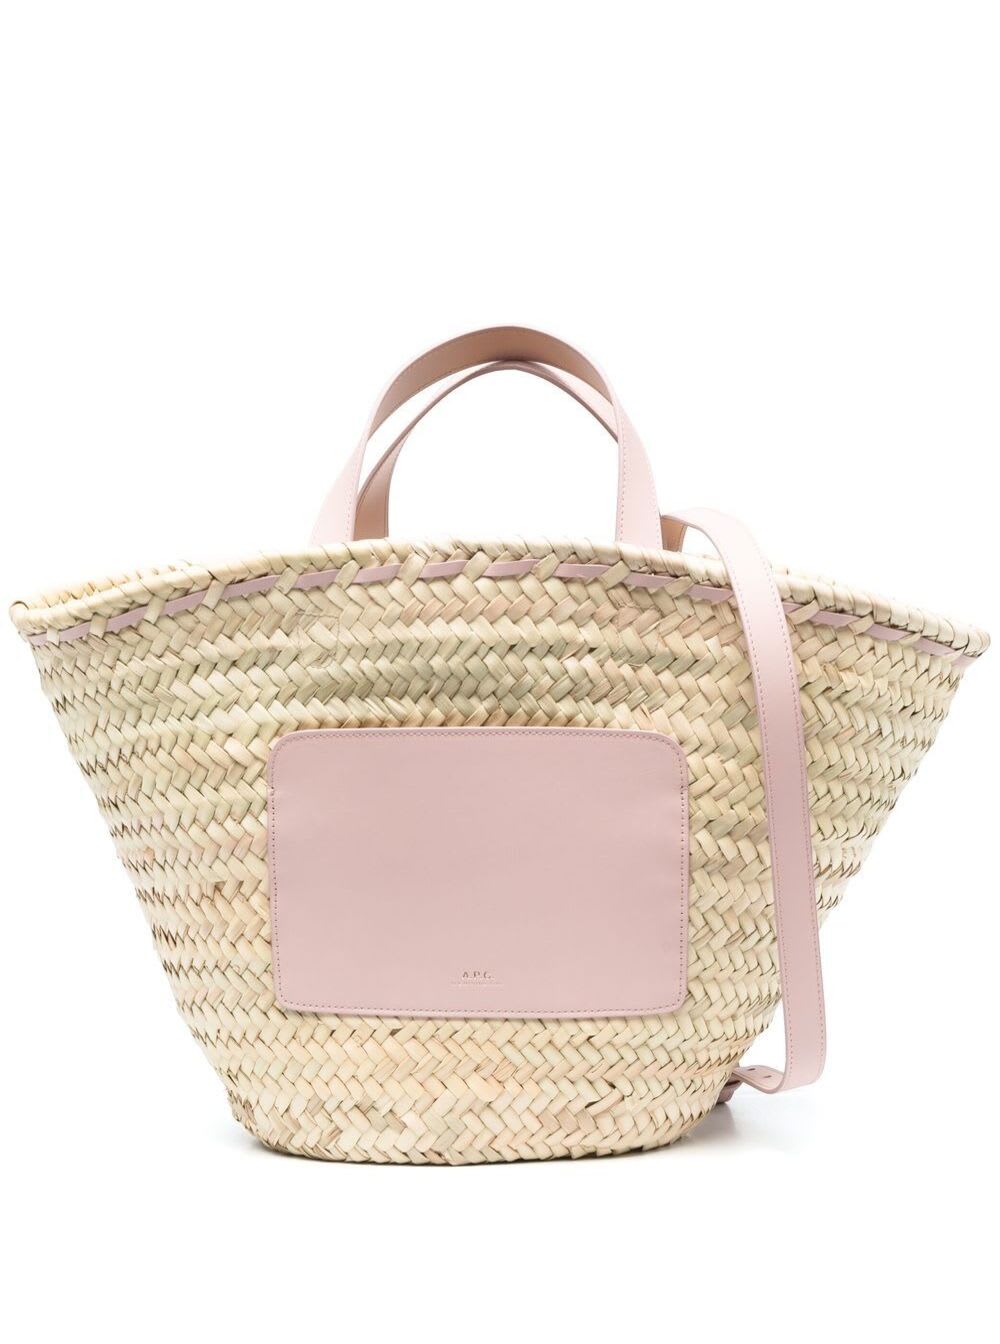 APC WOMANS ZOE WOVEN STRAW BEIGE AND PINK LEATHER SHOPPER BAG